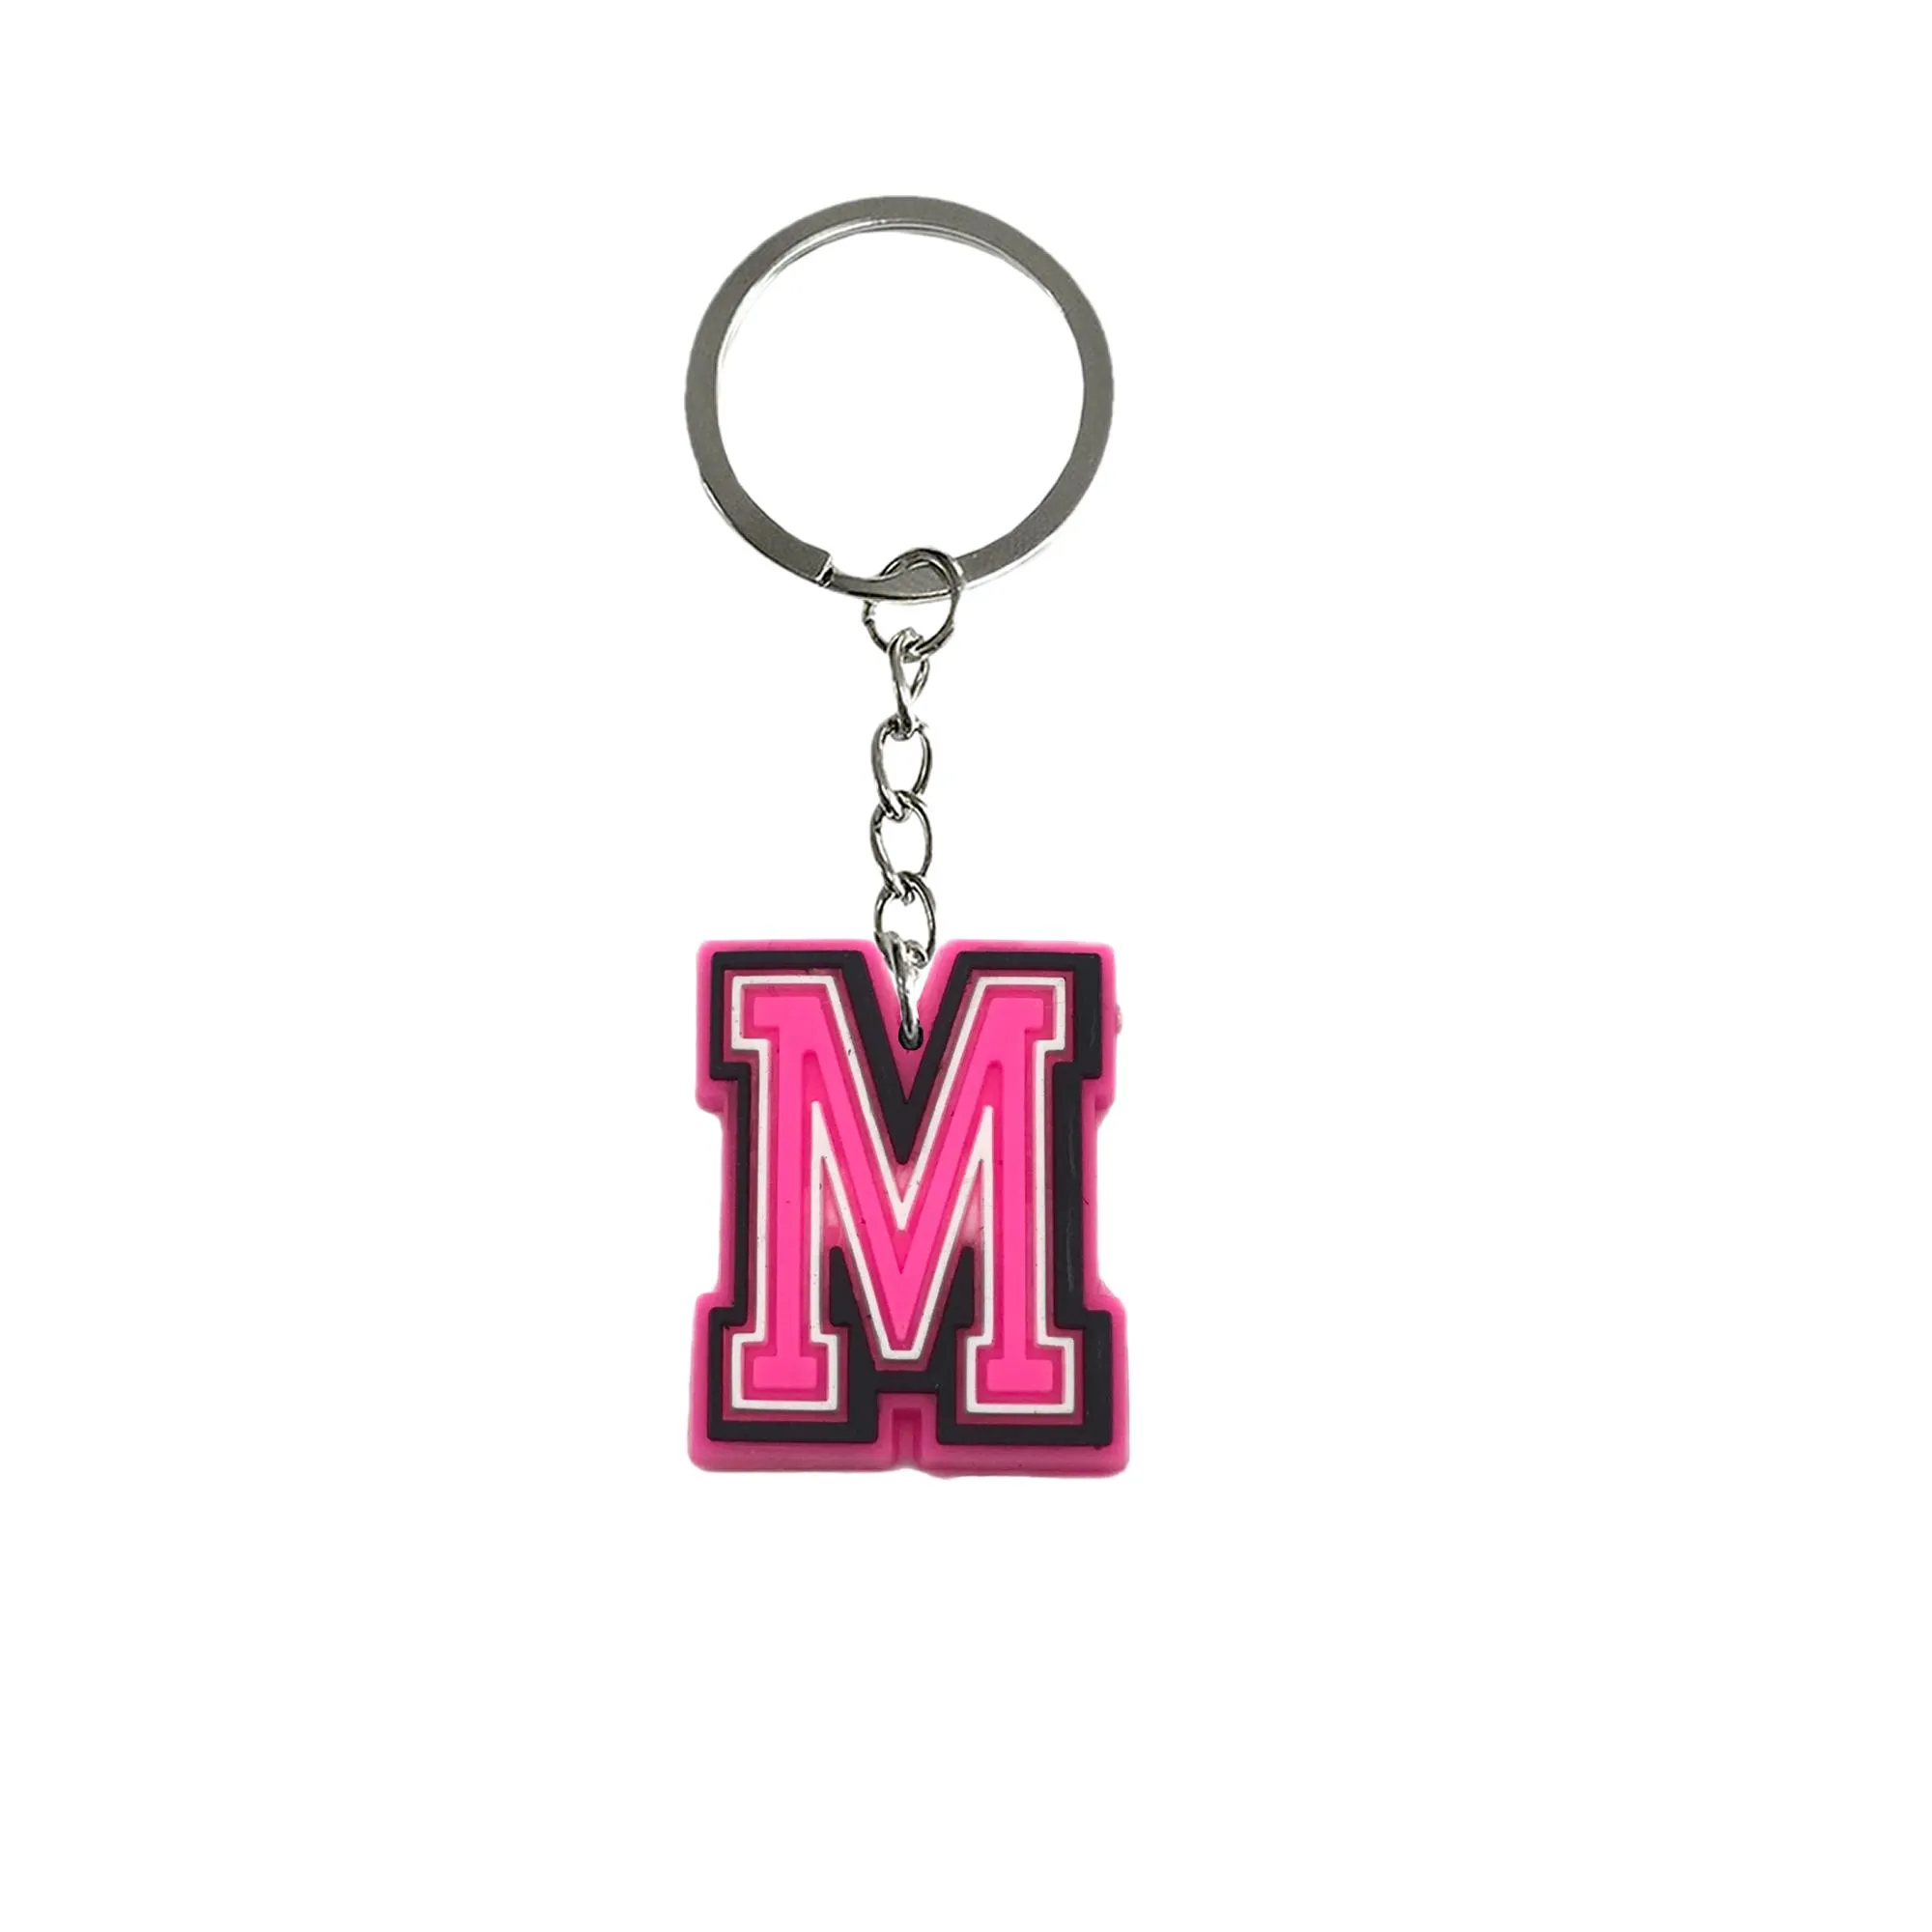 pink letter keychain for tags goodie bag stuffer christmas gifts key pendant accessories bags mini cute keyring classroom prizes suitable schoolbag keychains school day birthday party supplies gift ring boys stuffers